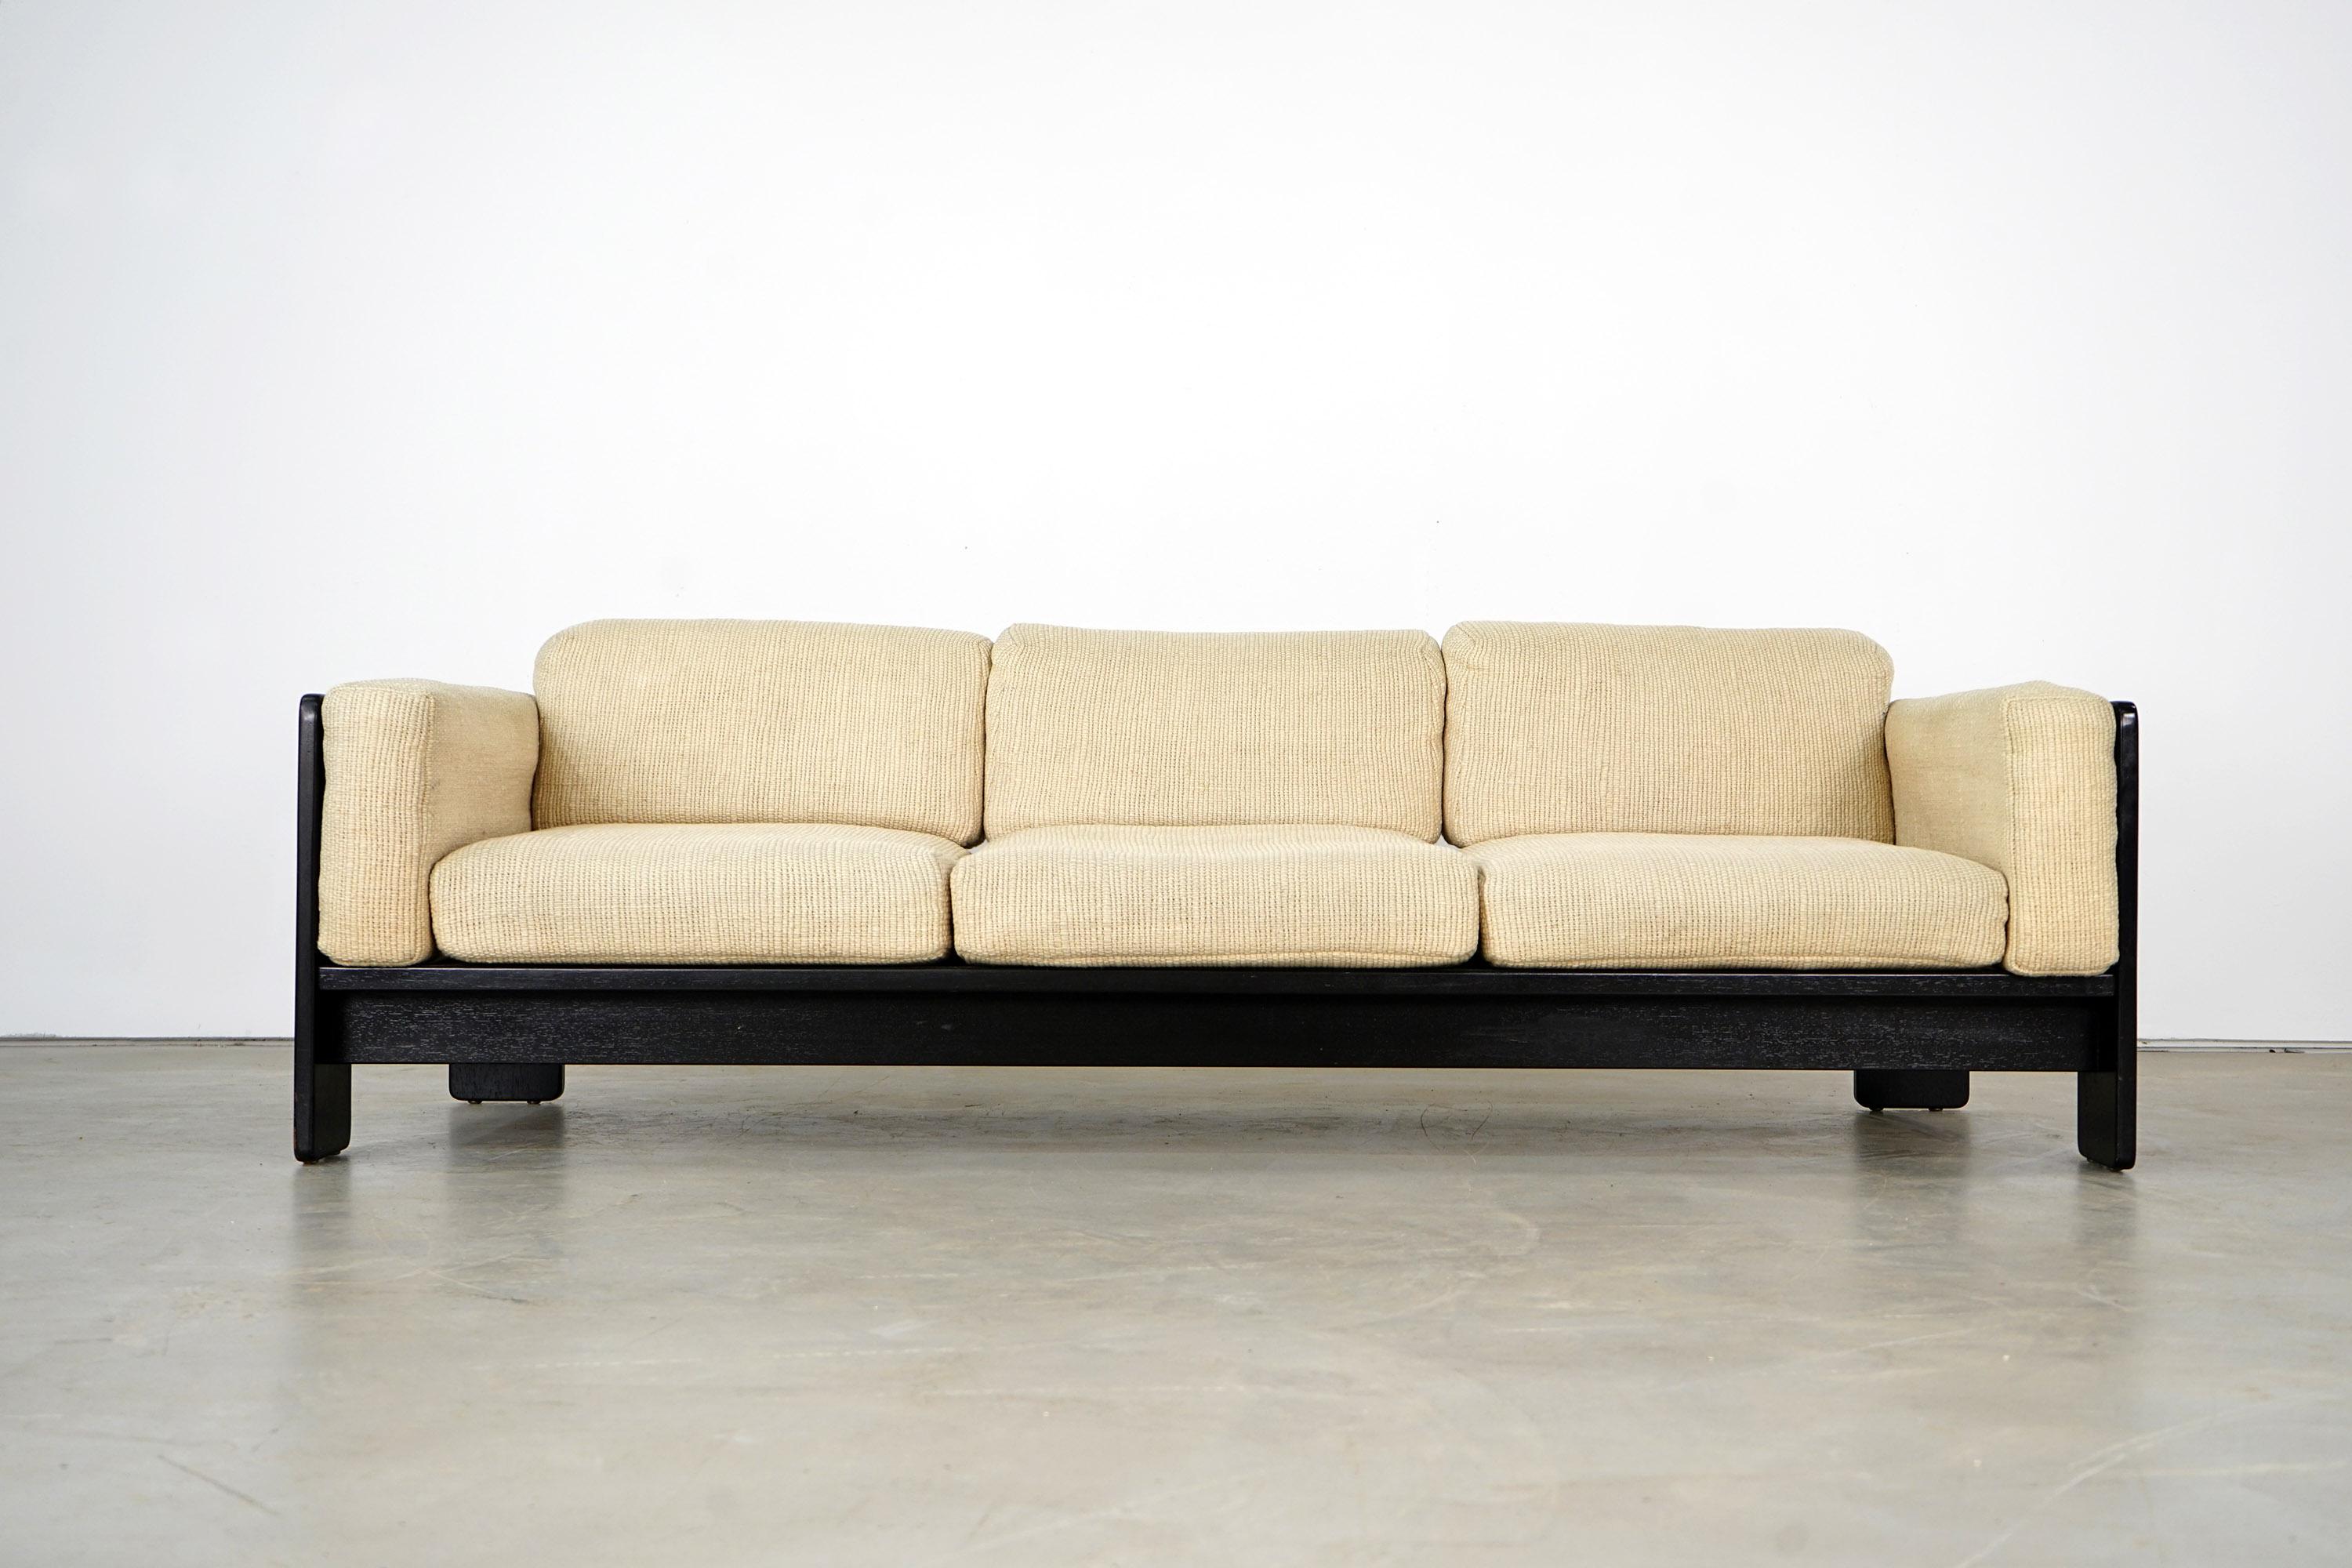 Three-seat sofa from the Bastiano series by Tobia and Afra Scarpa. The piece has a black ebonized oak frame and original sand-colored pillowcases. The upholstery has been renewed. Accordingly, the piece is in an excellent vintage condition with